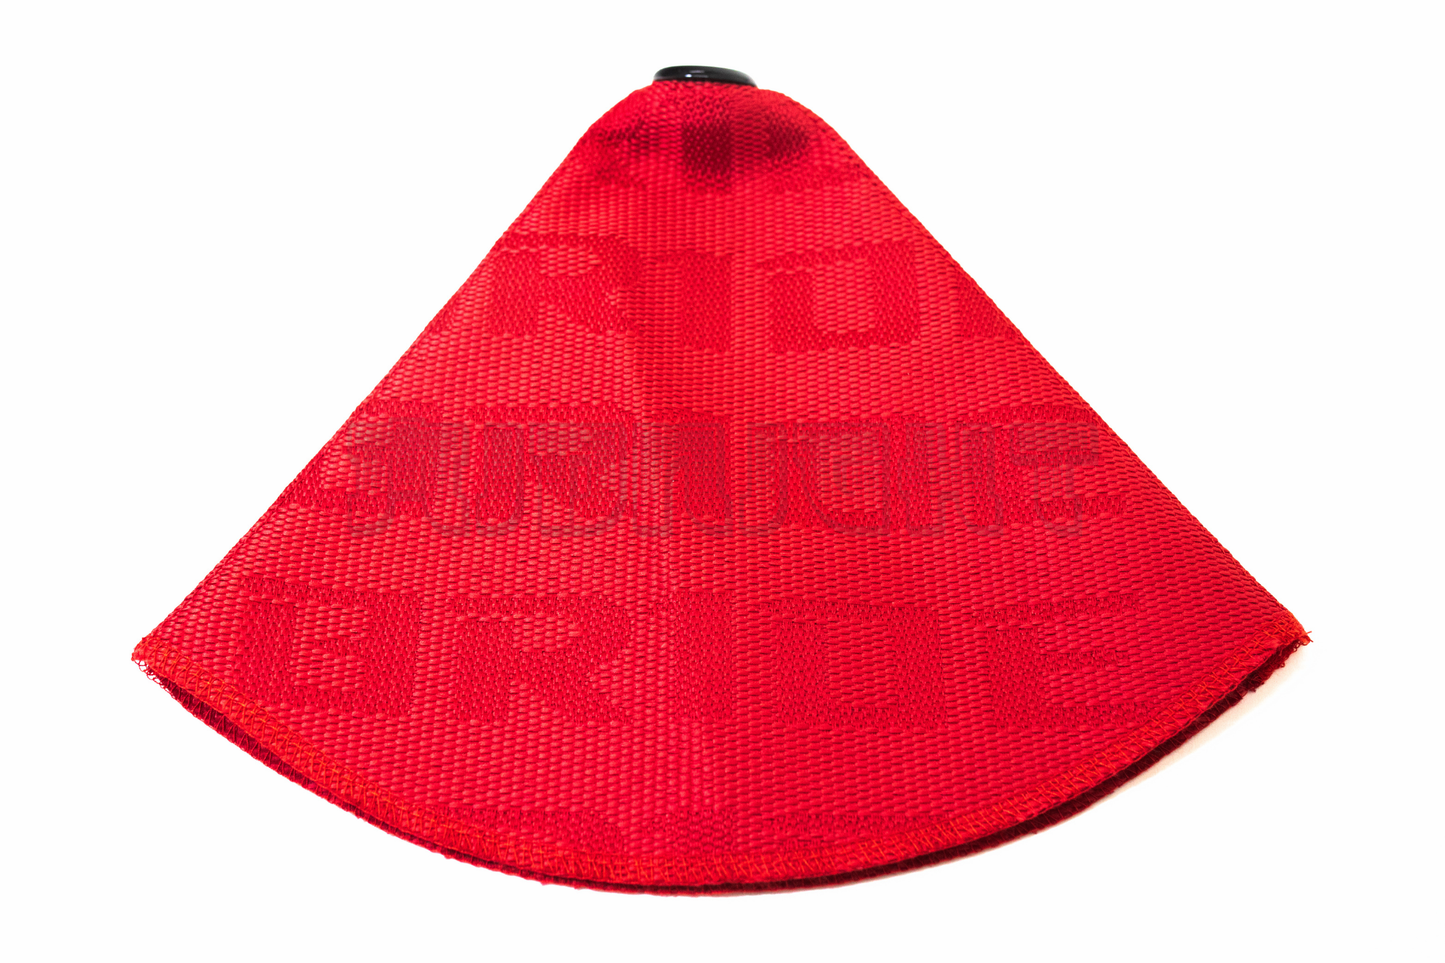 BRIDE Red Gradation MT/AT Shift Boot Cover